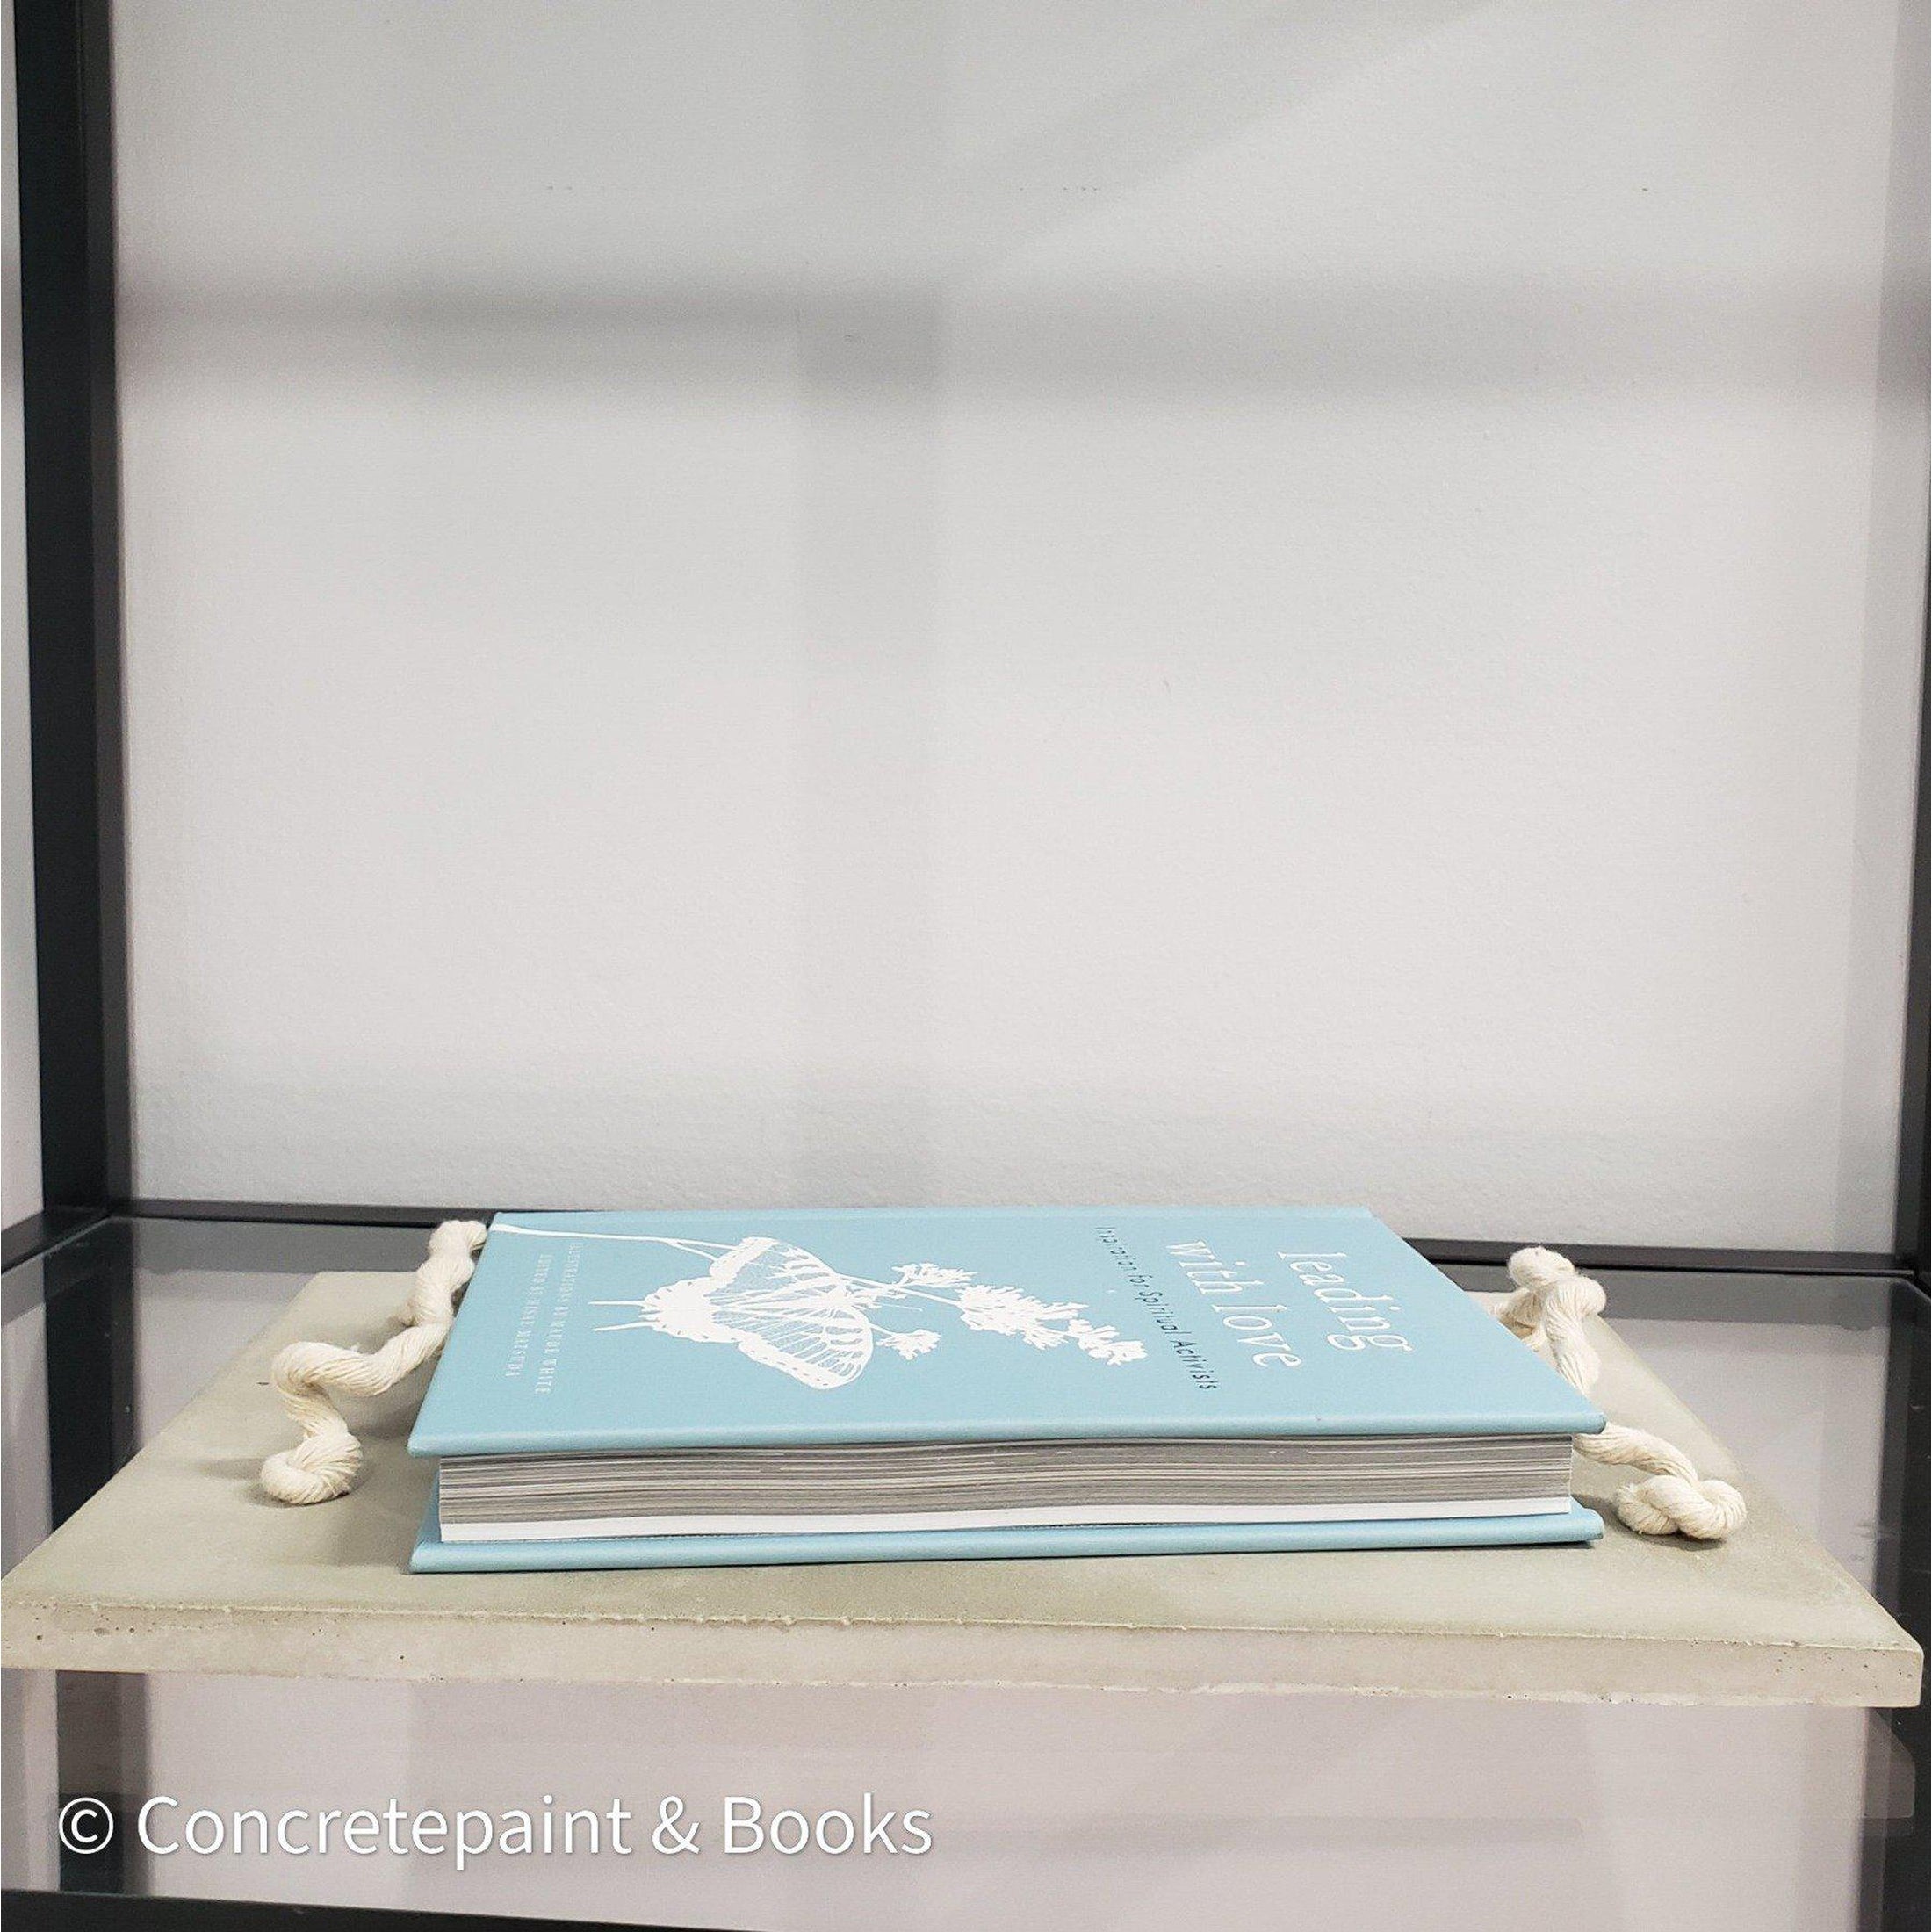 Decorative concrete tray with light blue hardcover book on top. Leading with Love Book and concrete home décor.